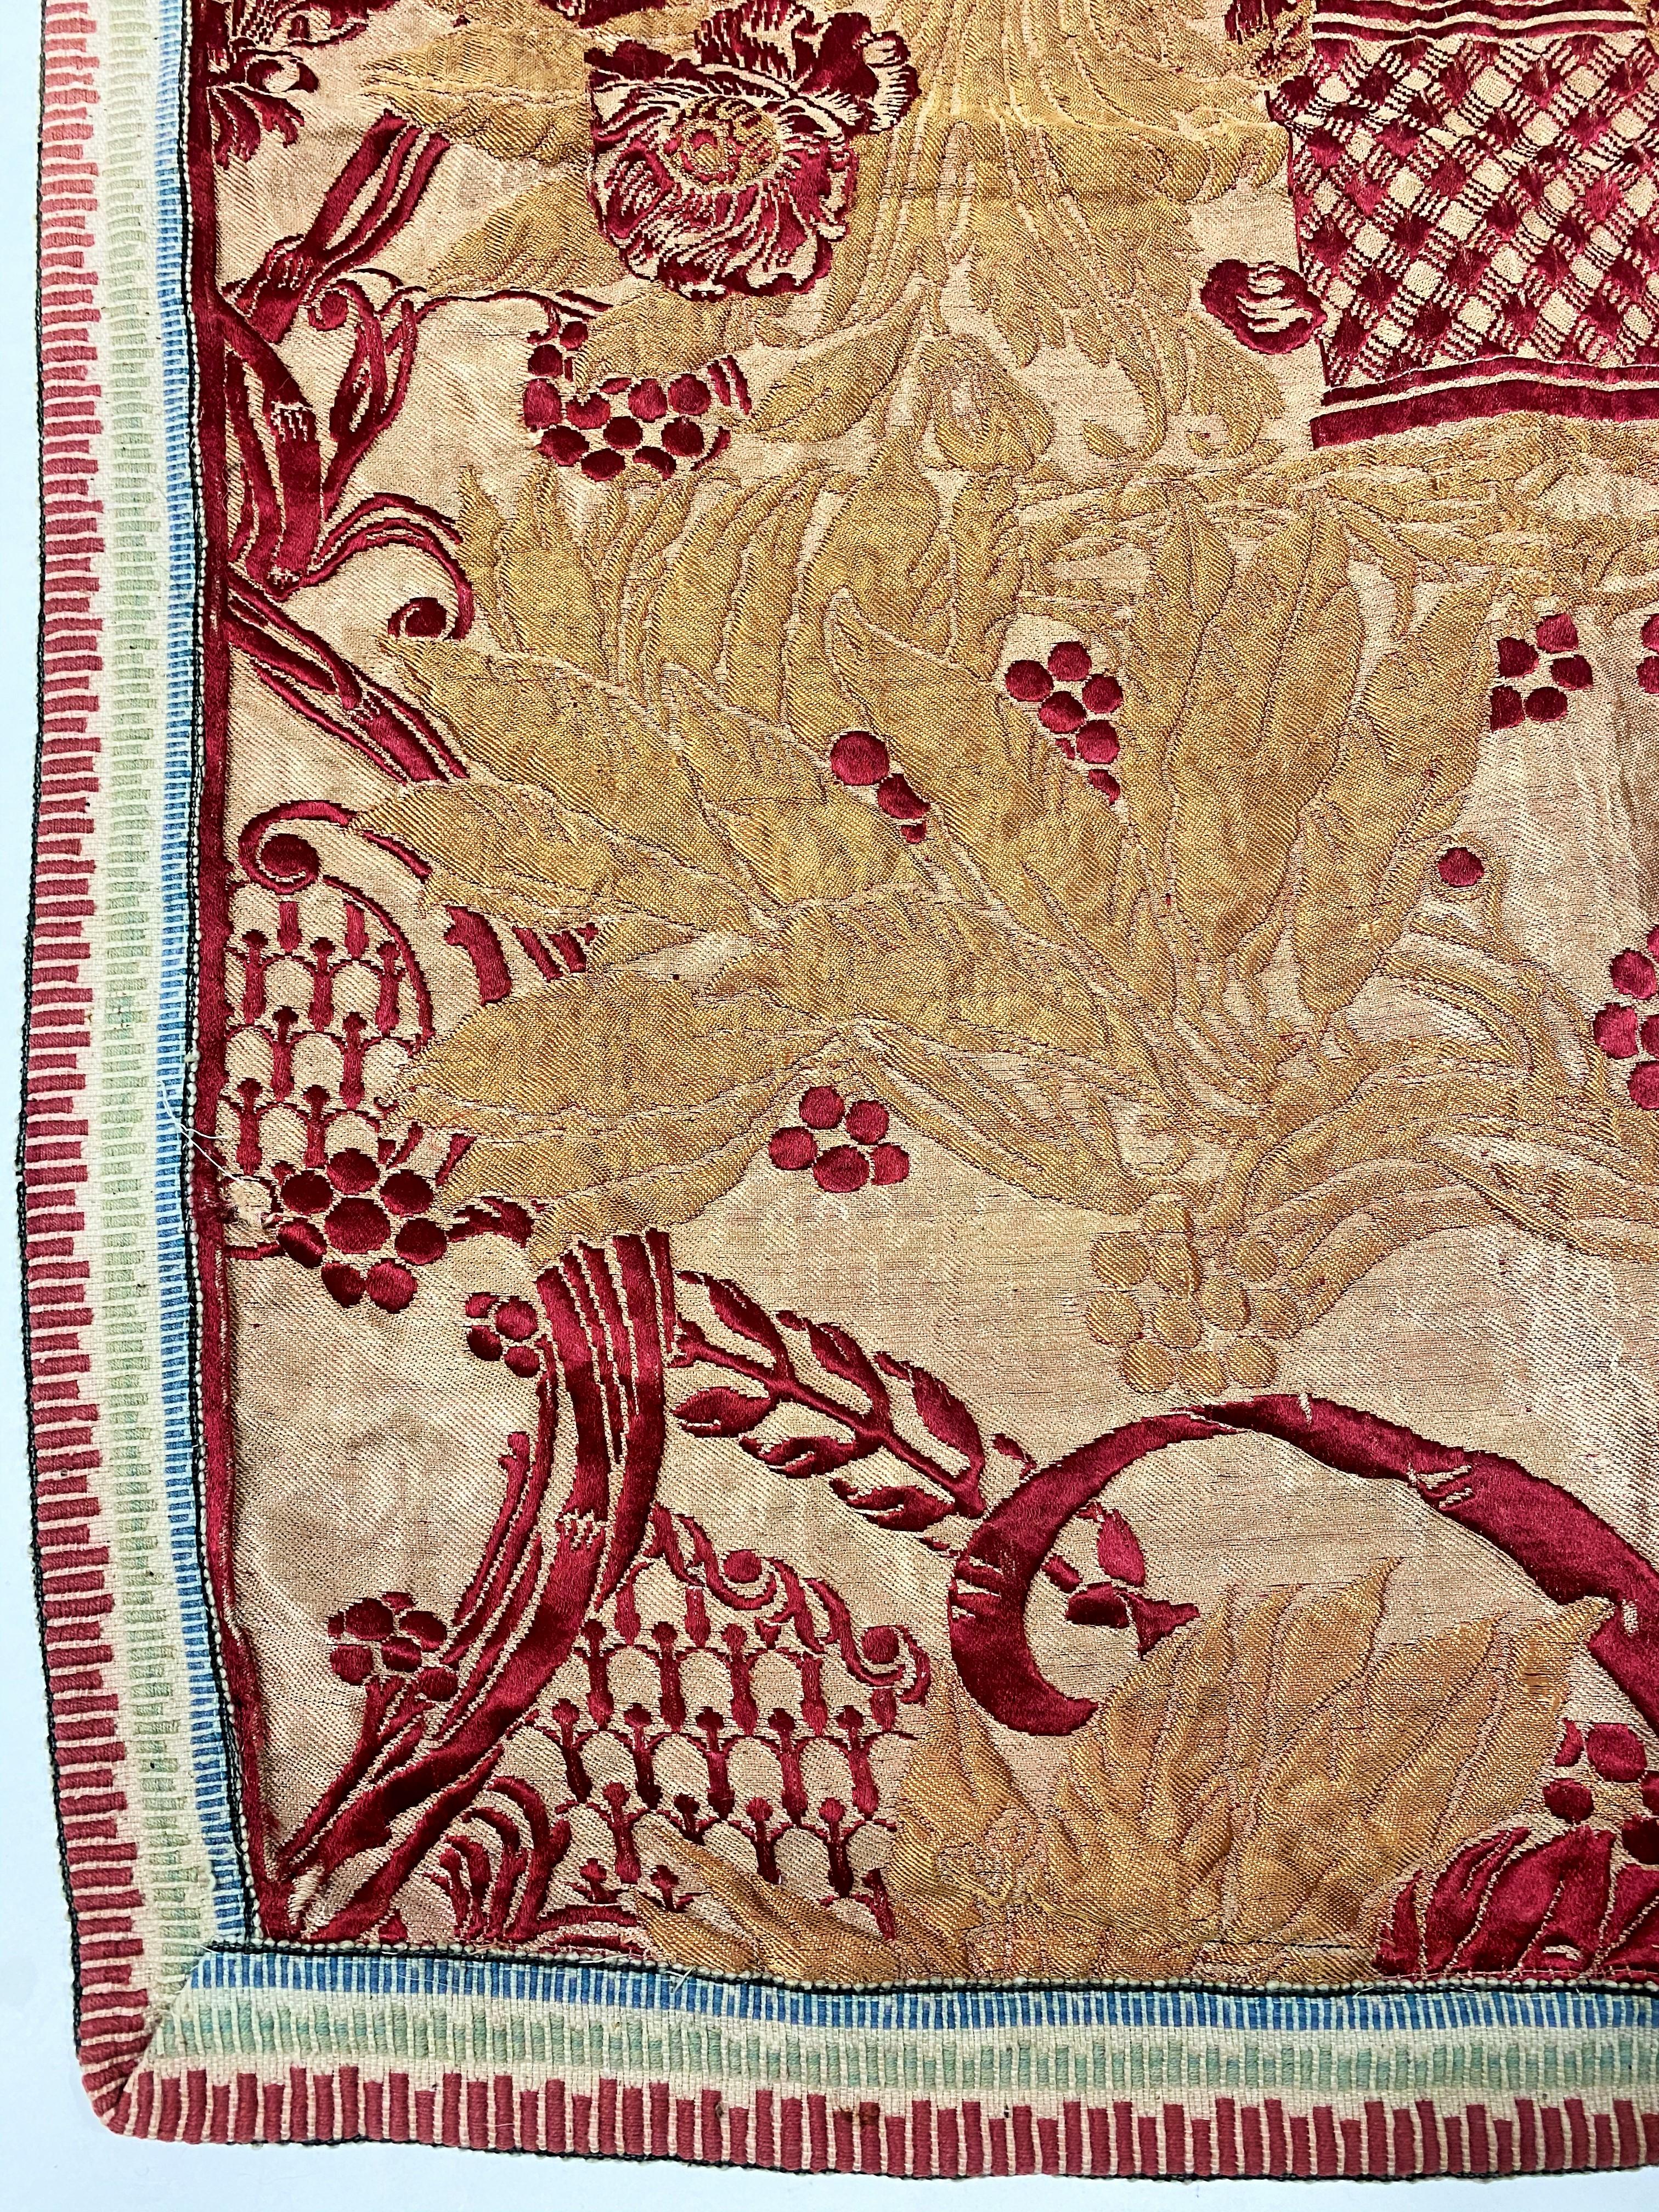 A French Art Nouveau Brocaded Silk by Adrien Karbowsky - Tassinari & Chatel 1899 For Sale 3